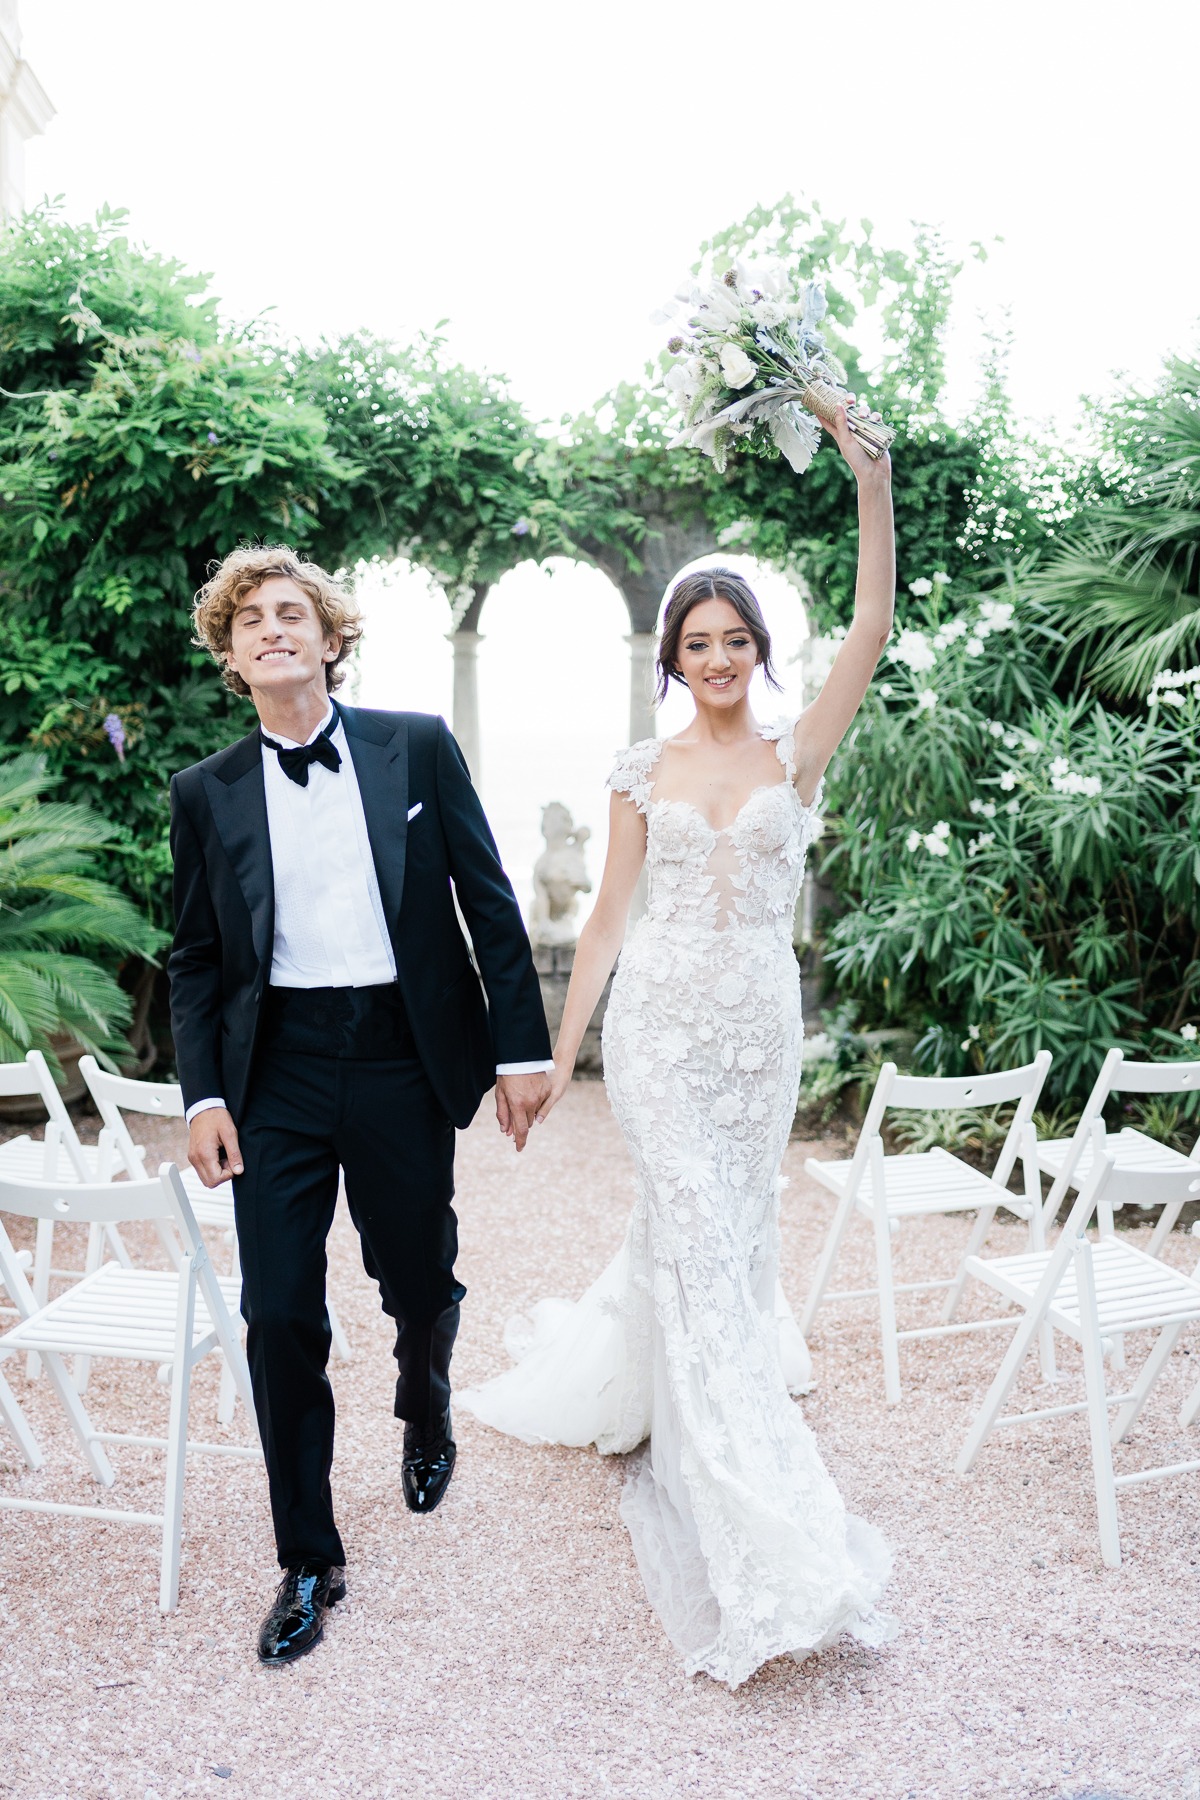 Romantic Italian Wedding Inspiration With A Breathtaking View